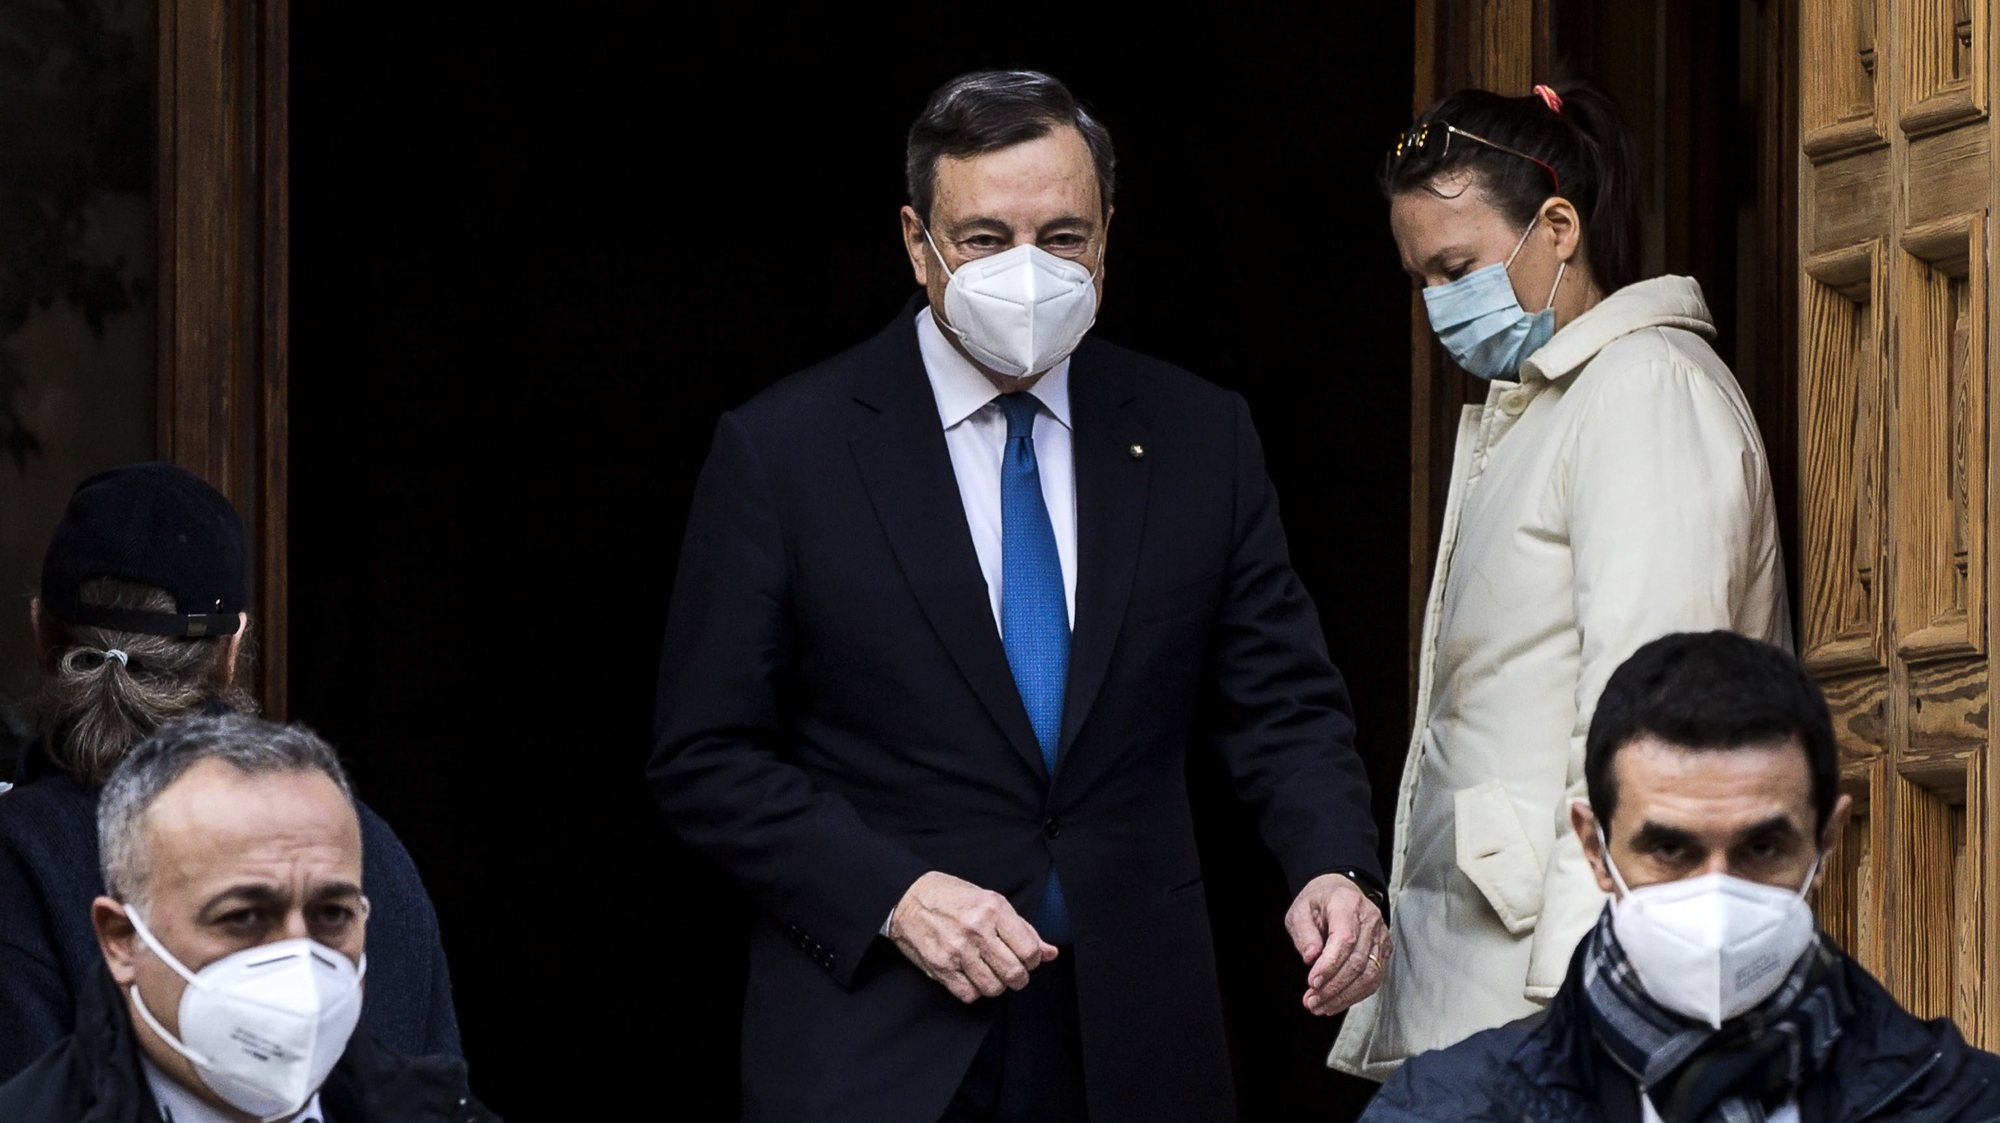 epa08986906 Italian designated-prime minister Mario Draghi (C) leaves his home in Rome, Italy, 04 February 2021. Draghi accepted on 03 February a mandate from the Italian president to form a national unity government after the previous coalition collapsed.  EPA/ANGELO CARCONI